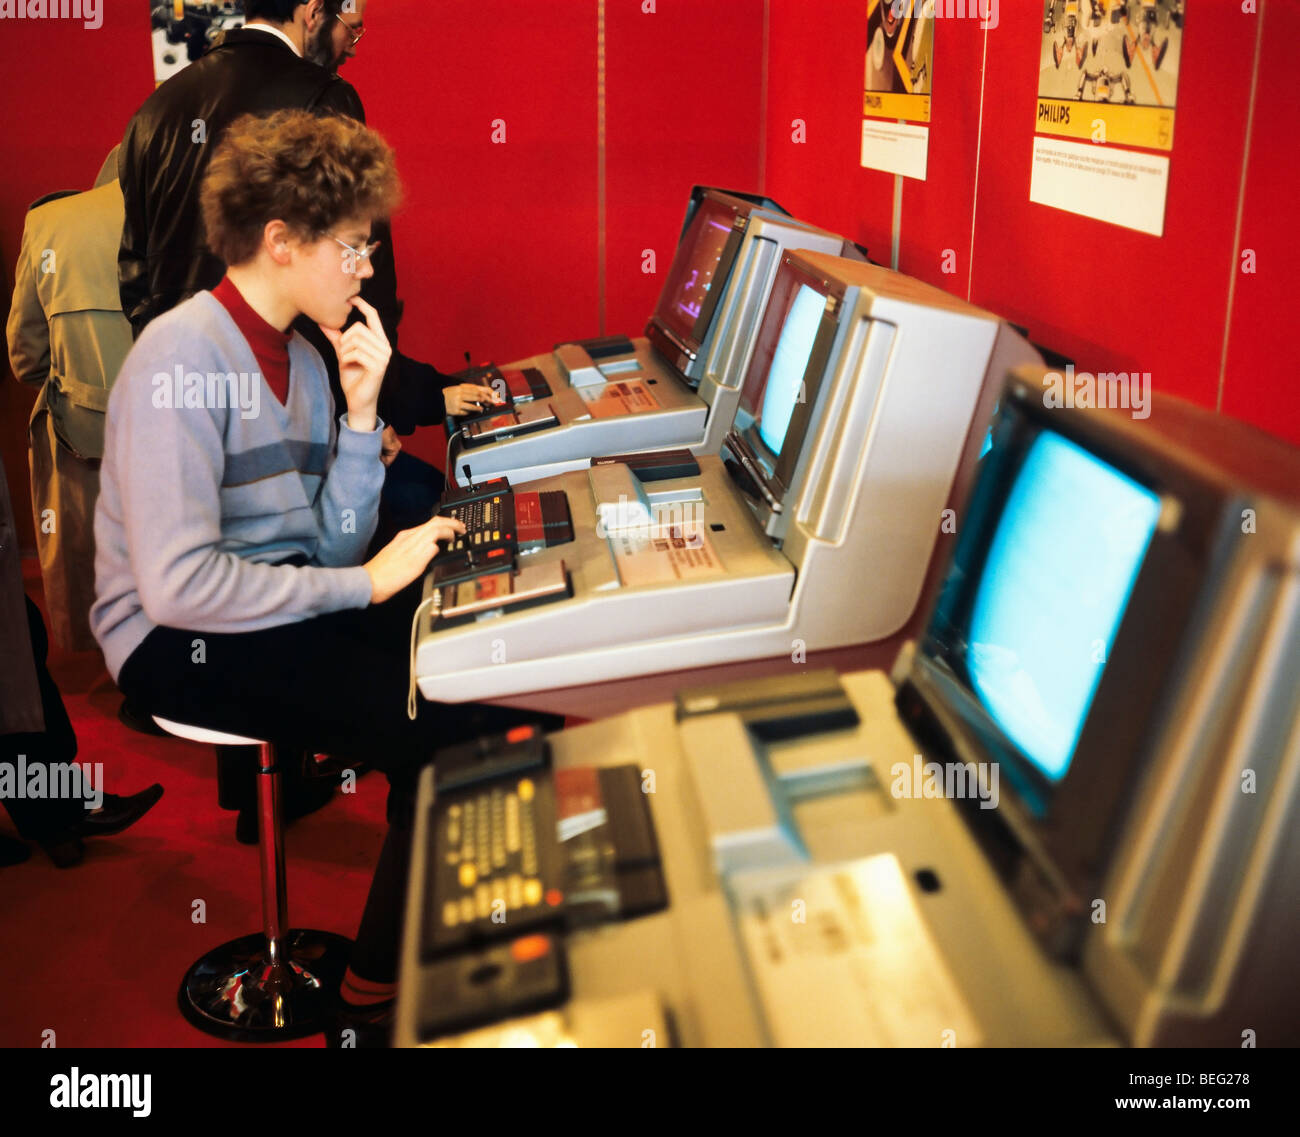 1980s Teen playing computer games, vintage computer playstations exhibition, Paris, France, Europe Stock Photo